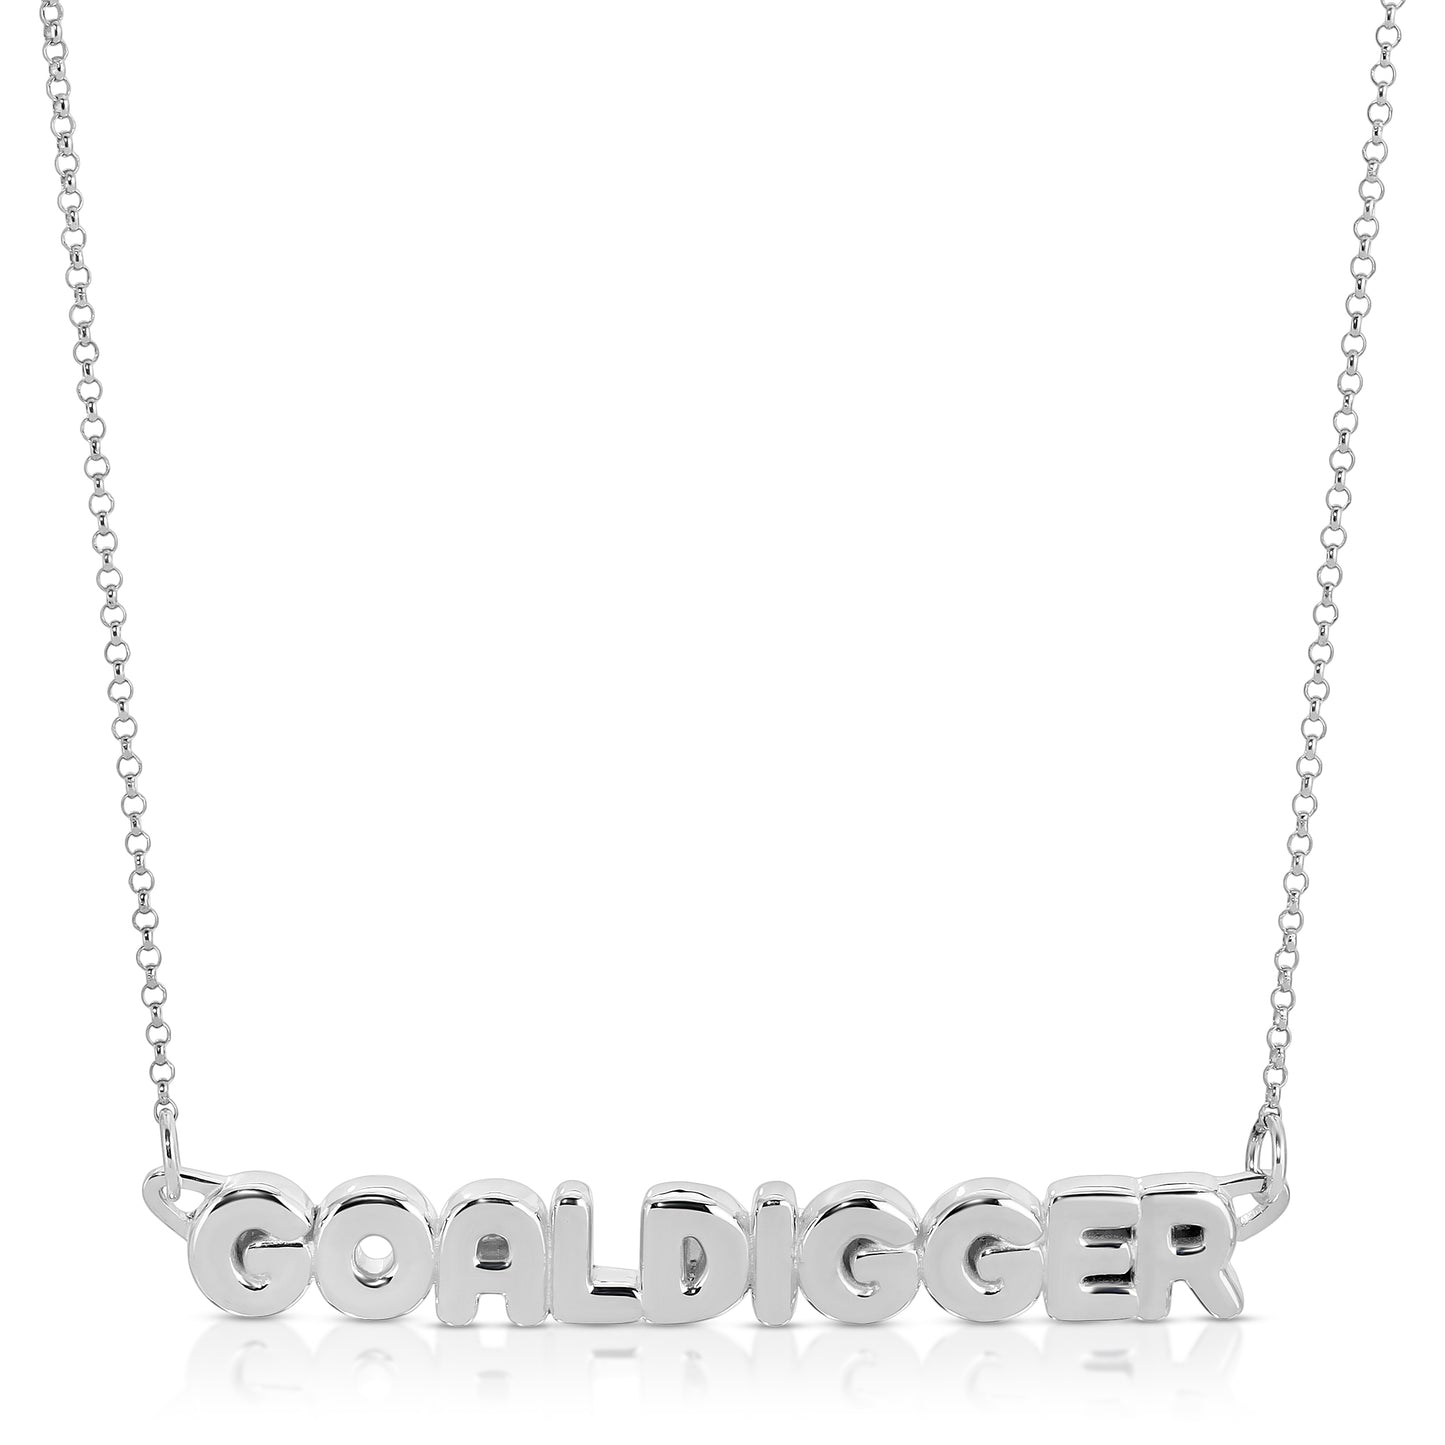 silver goal digger necklace from the wandering jewel